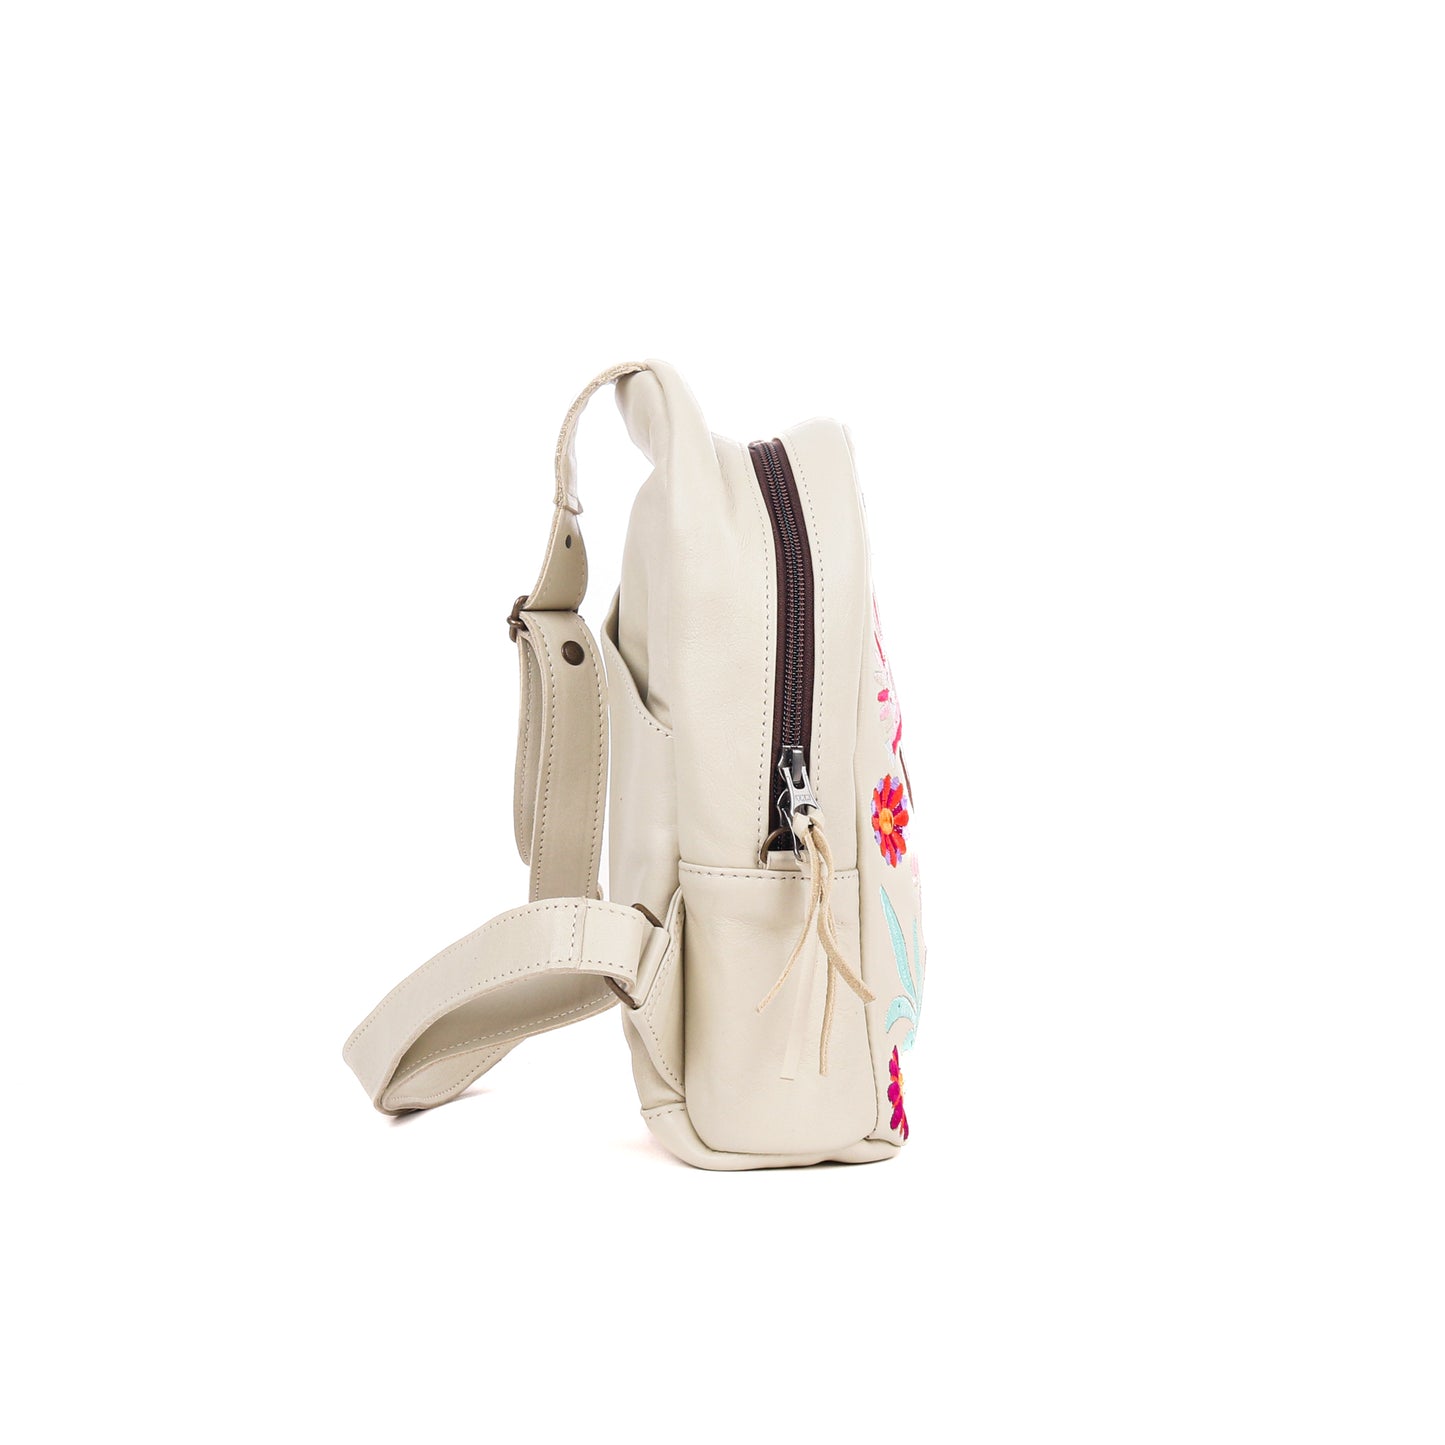 CROSSBODY SLING - 10 YEAR ANNIVERSARY -  EMBROIDERED LEATHER IN PINK - BONE